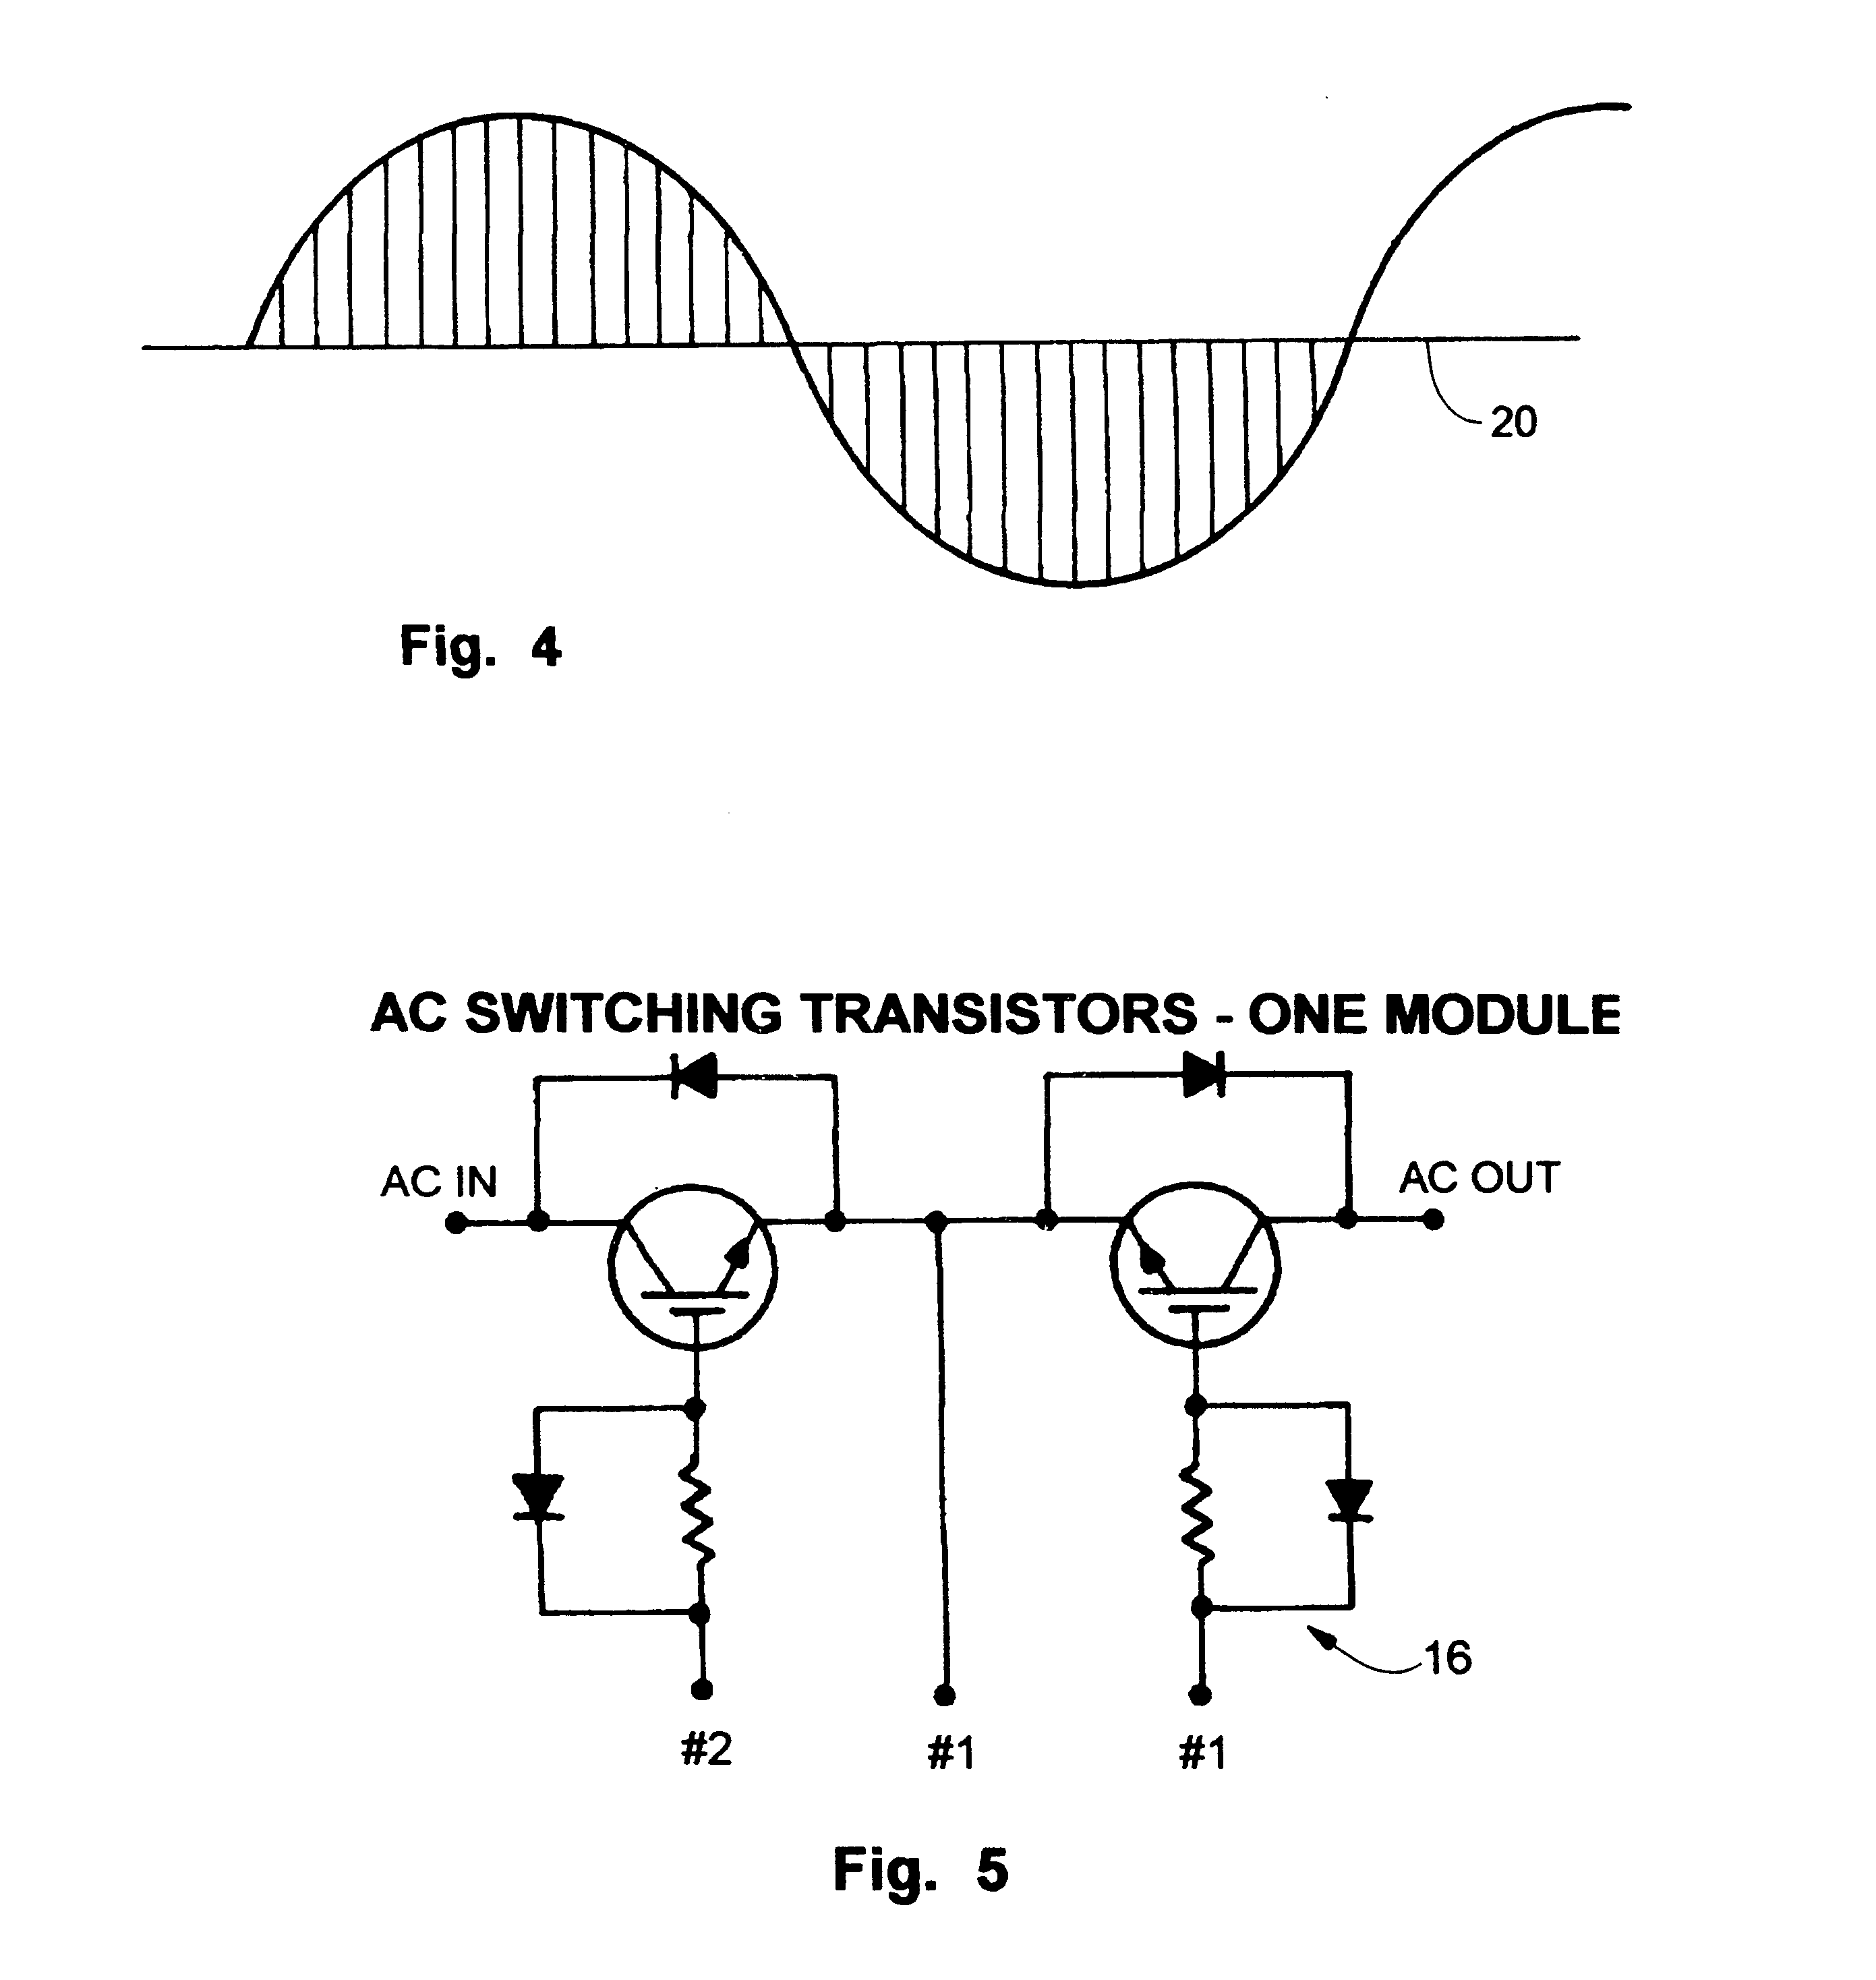 Electrical power conservation apparatus and method